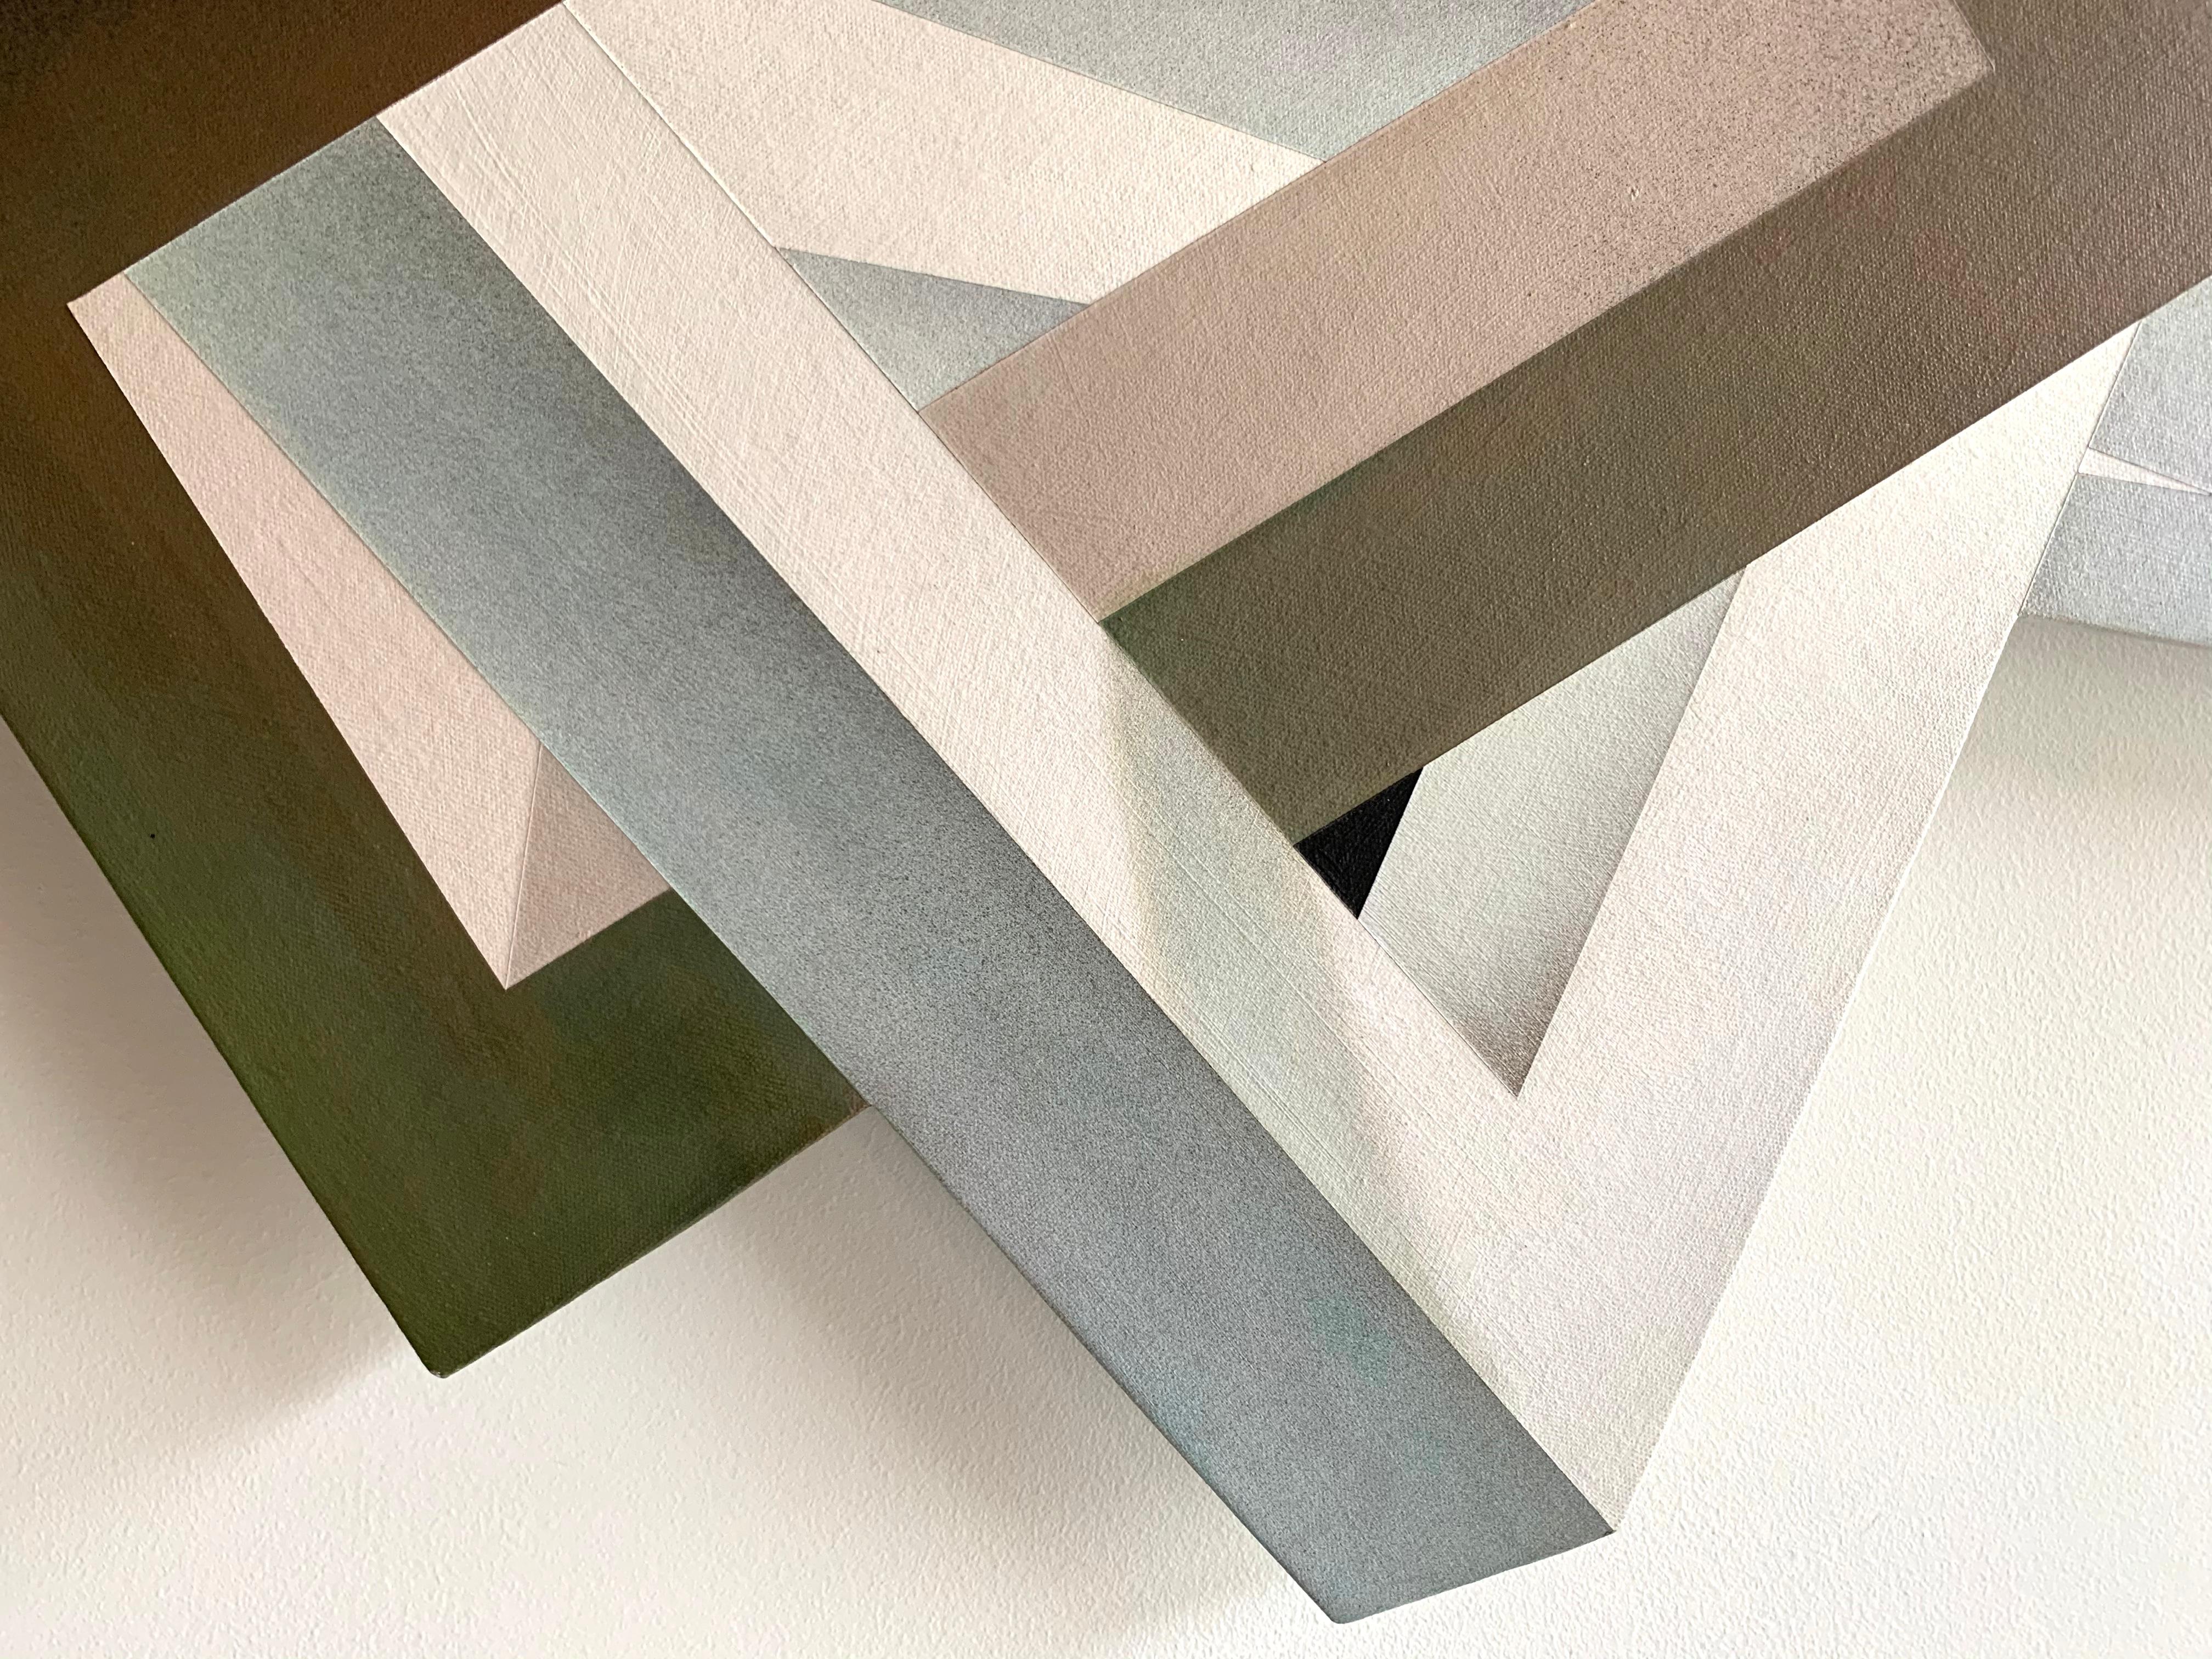 Elements (beige and white) abstract geometric wall sculpture painting - Painting by Shozo Nagano